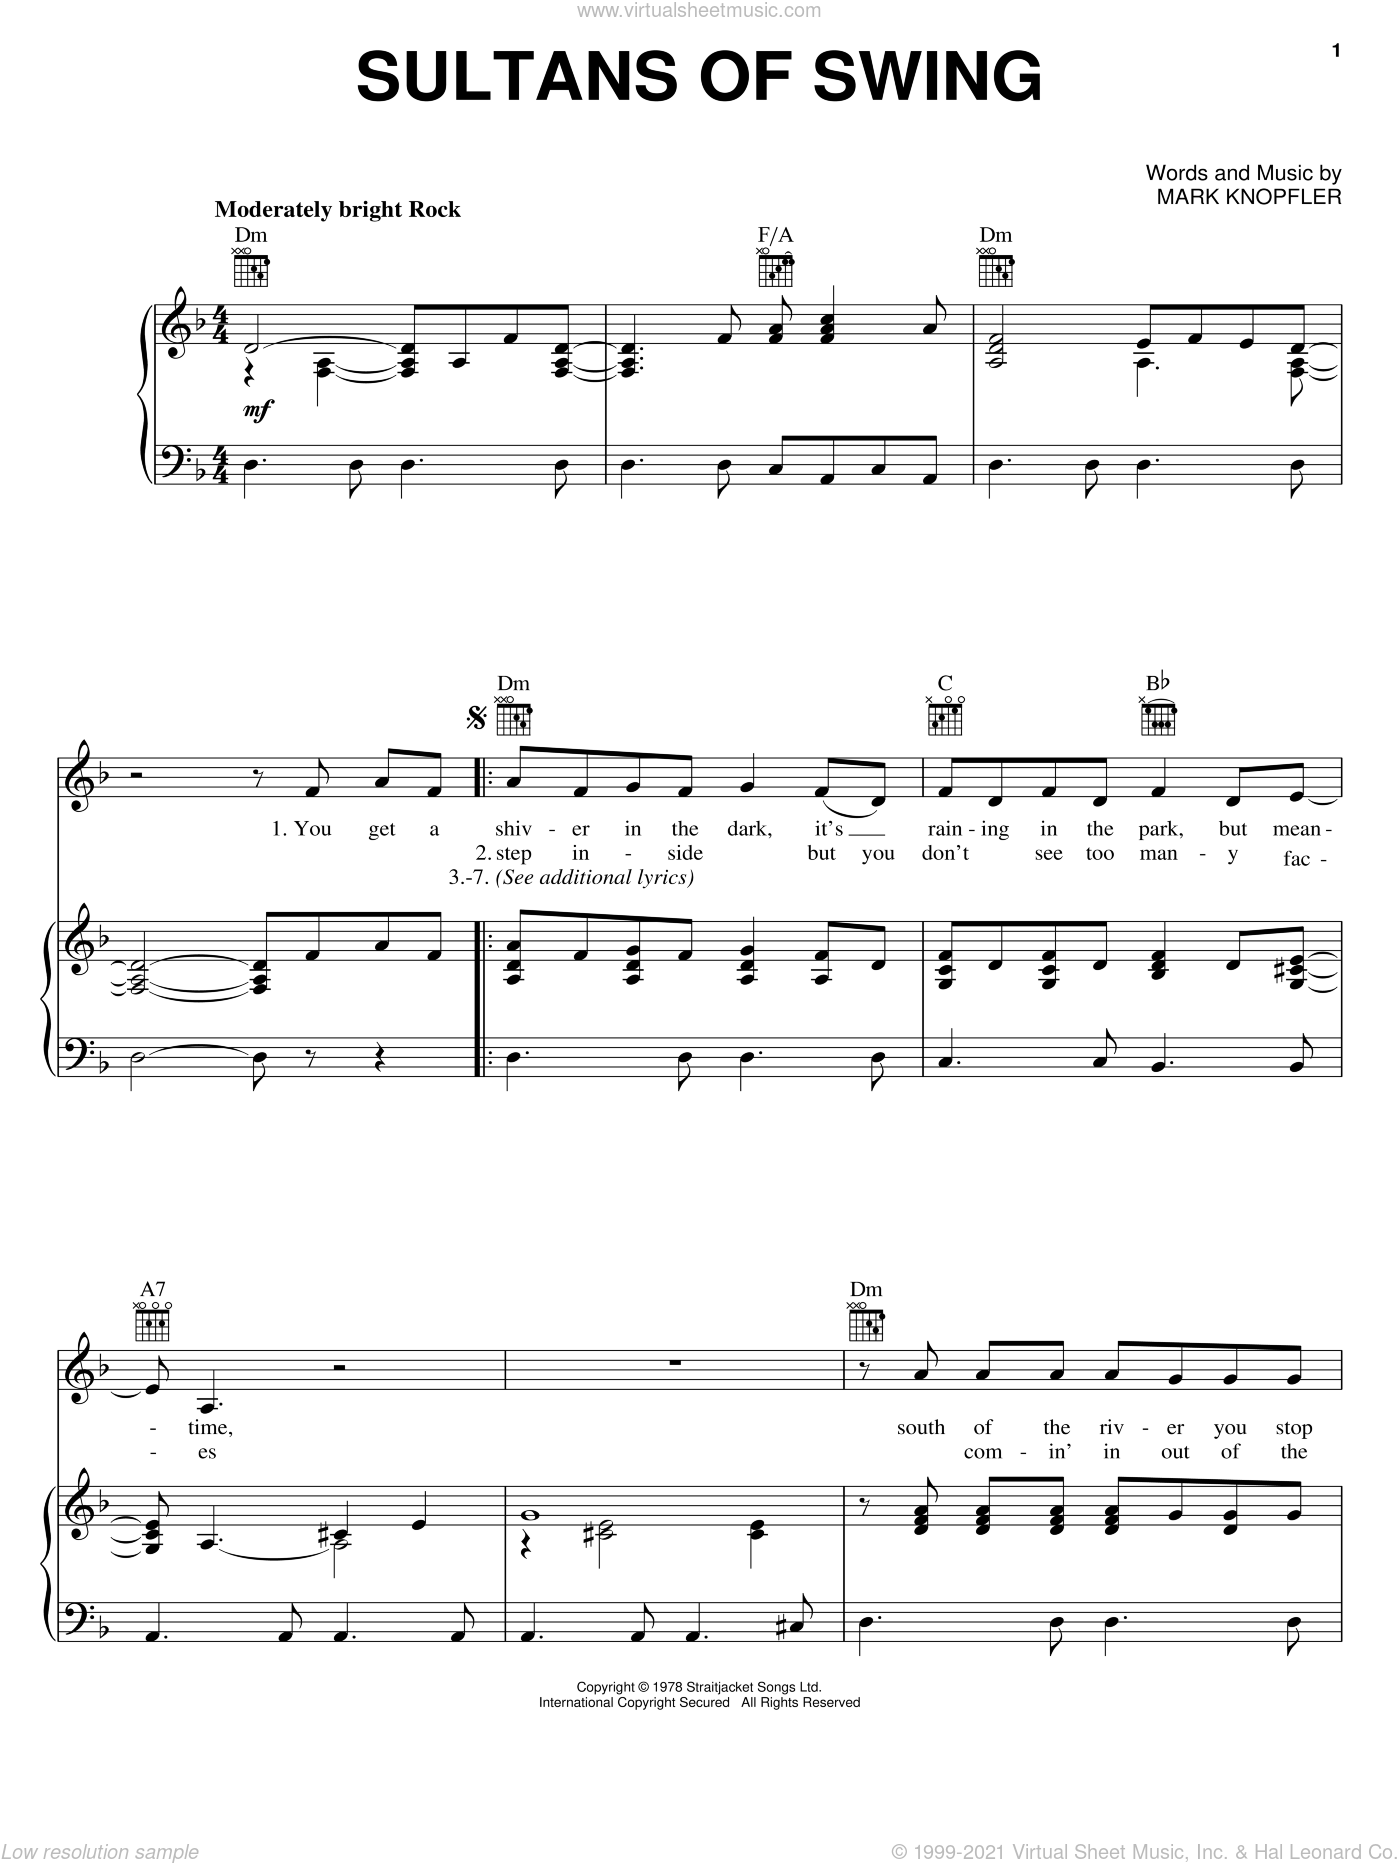 Straits - Sultans Of Swing sheet music for voice, piano or guitar